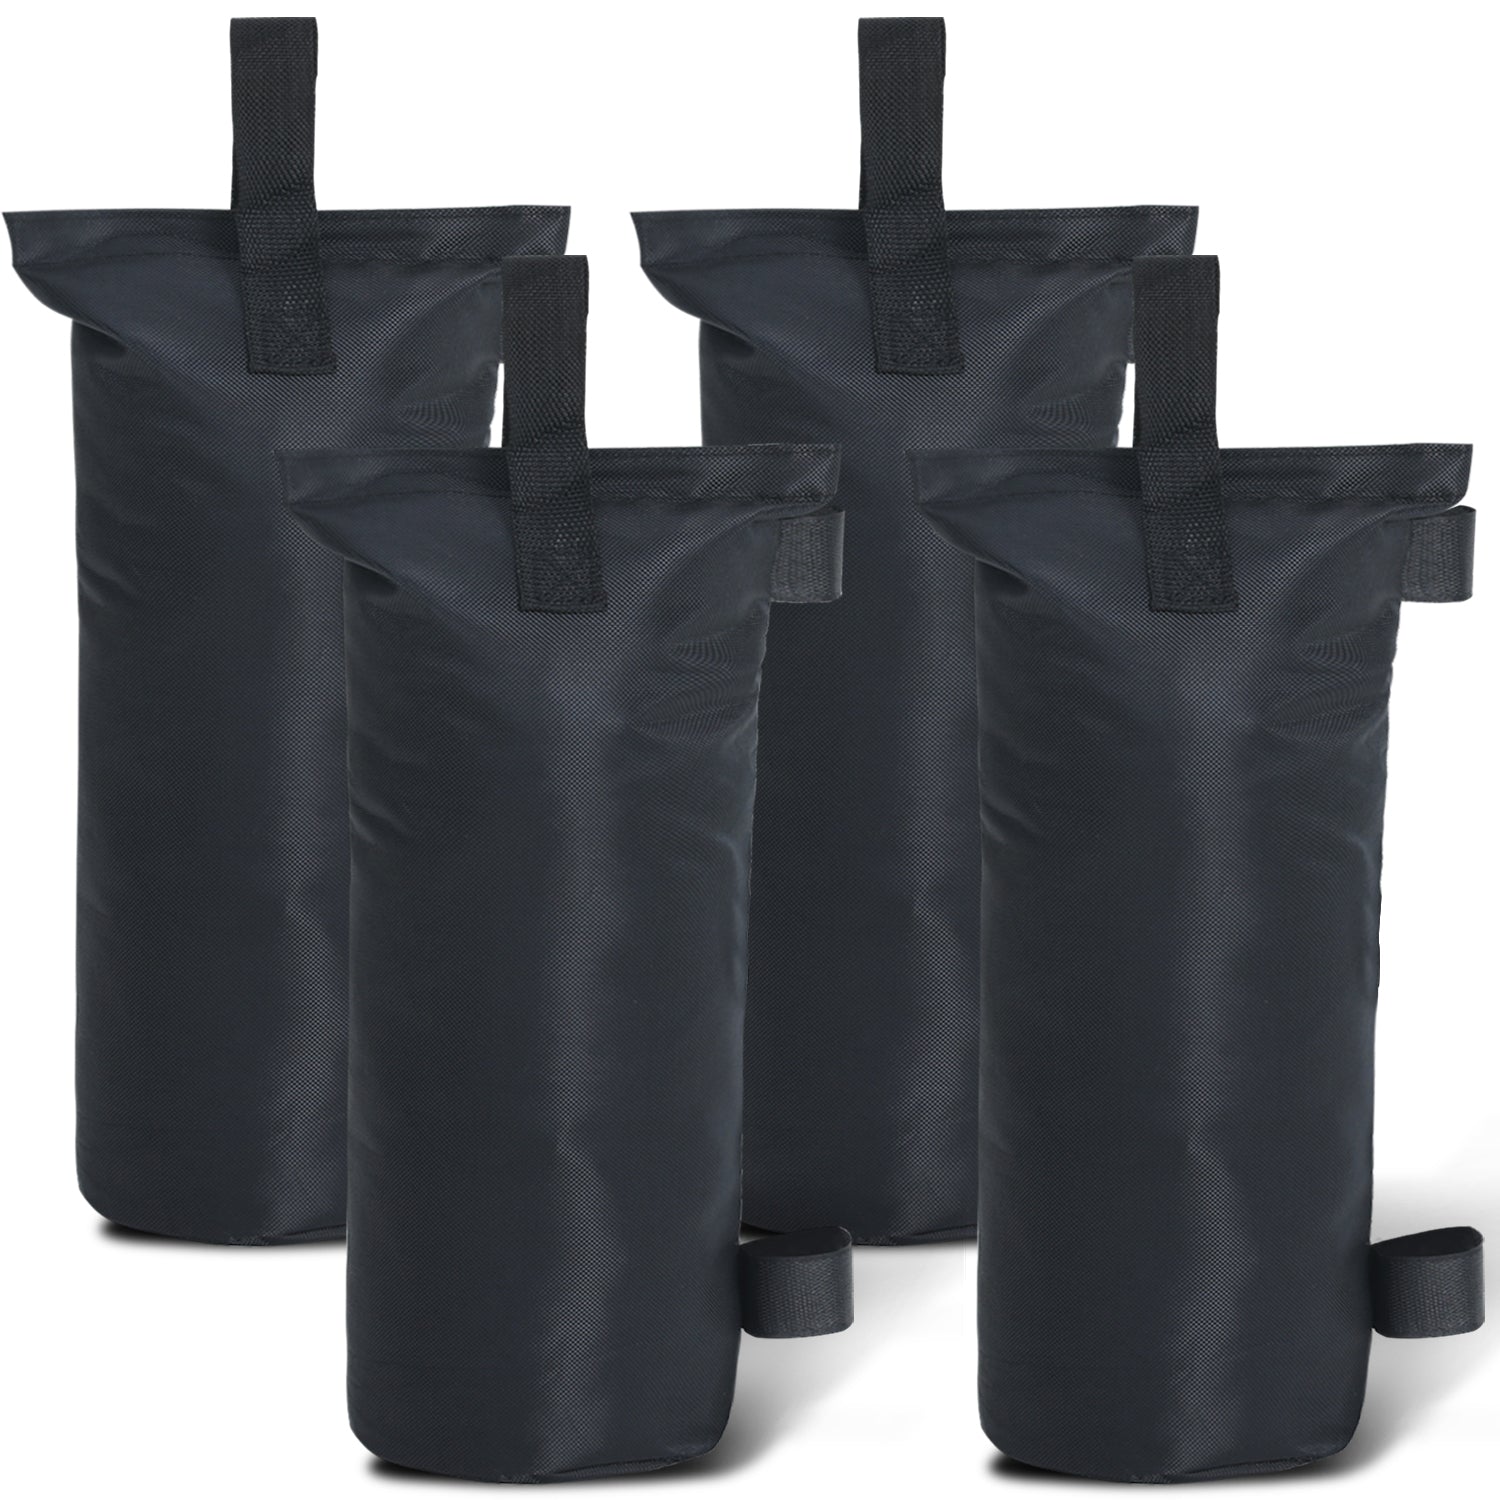 ABCCANOPY 100LBS/112LBS/150LBS Extra Large Canopy Sand Bags, 4-Packs (Without Sand)